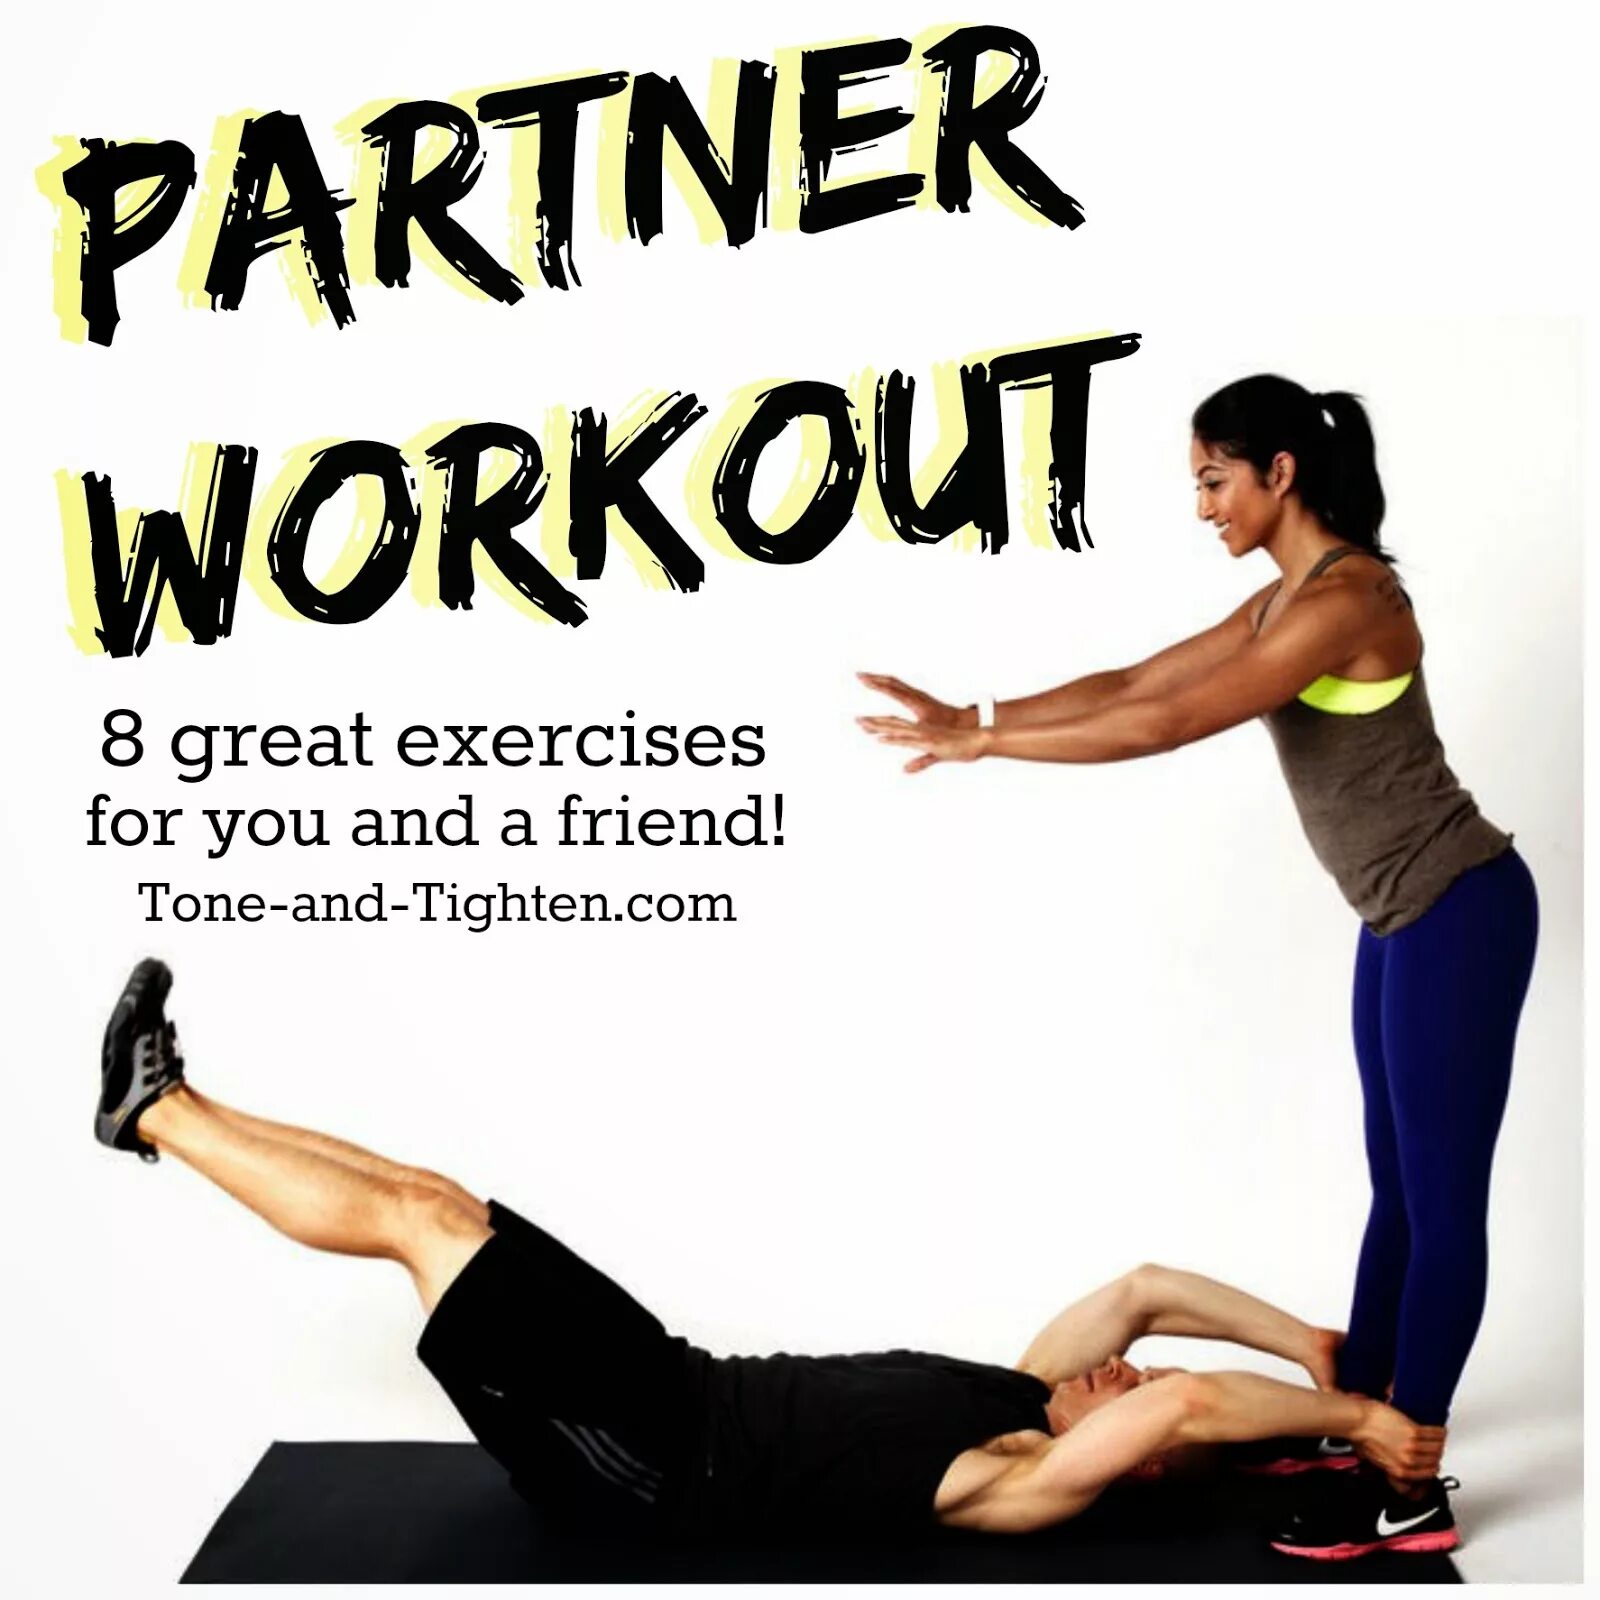 Exercise is great. Workout exercises. Workout friends. Friends exercise. Workout partners – xpray.